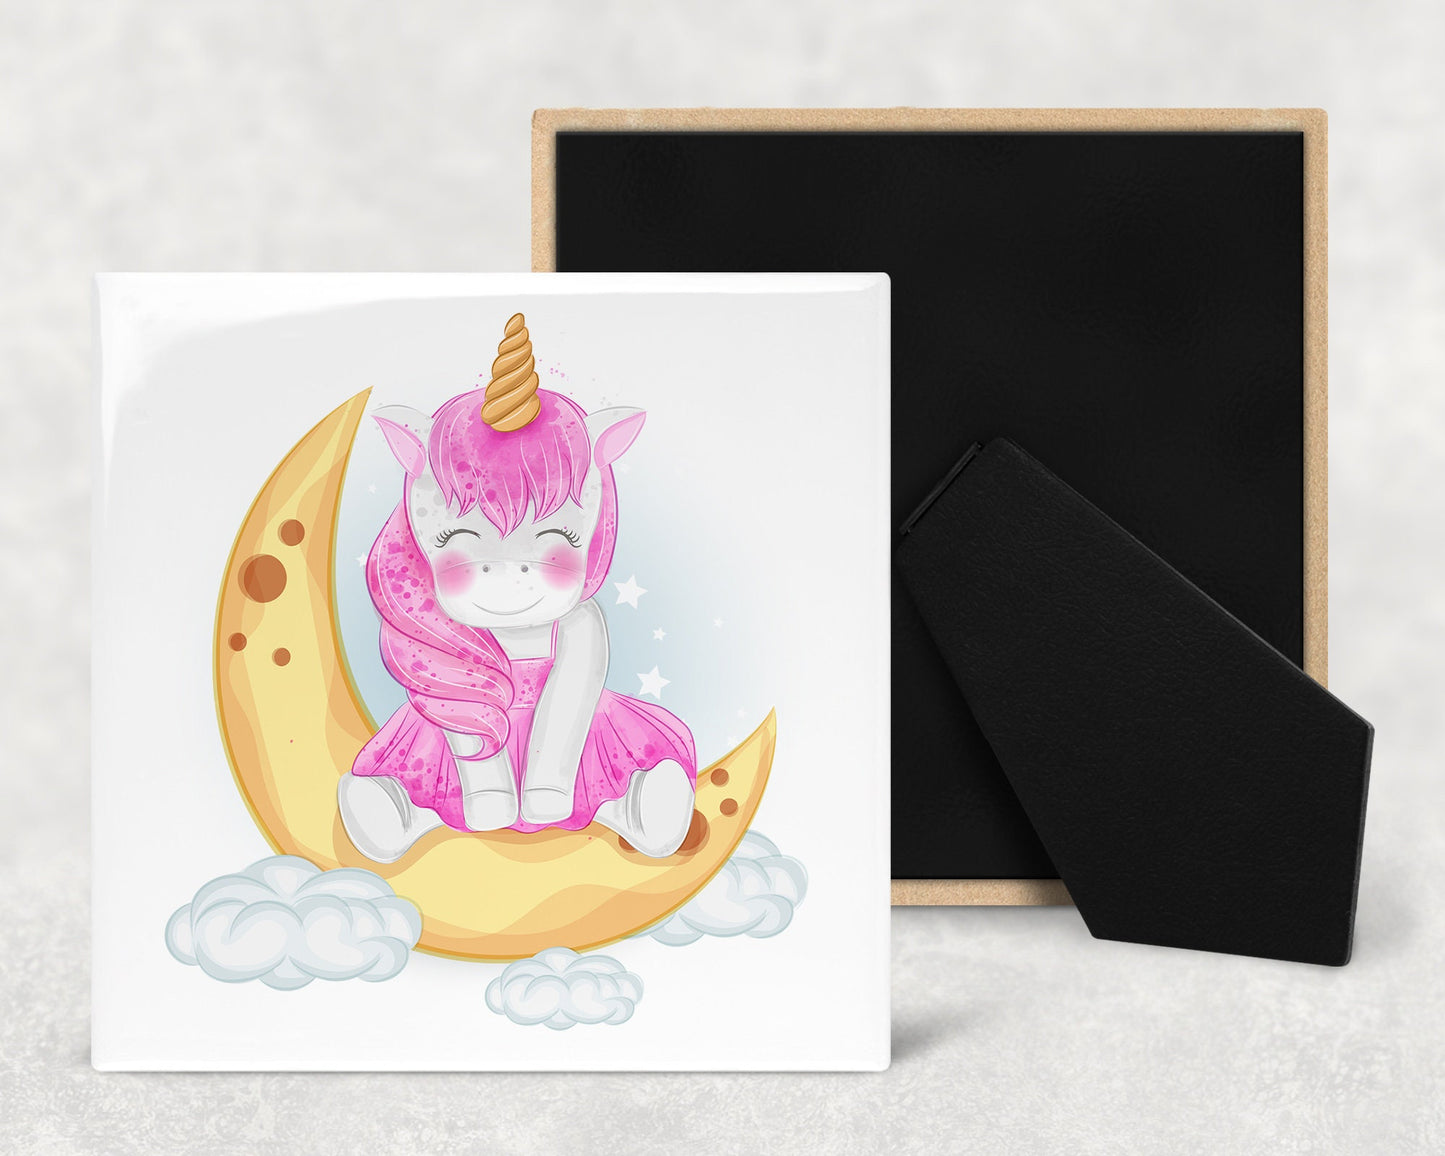 Cute Unicorn on Moon Nursery Art Decorative Ceramic Tile with Optional Easel Back - Available in 3 Sizes